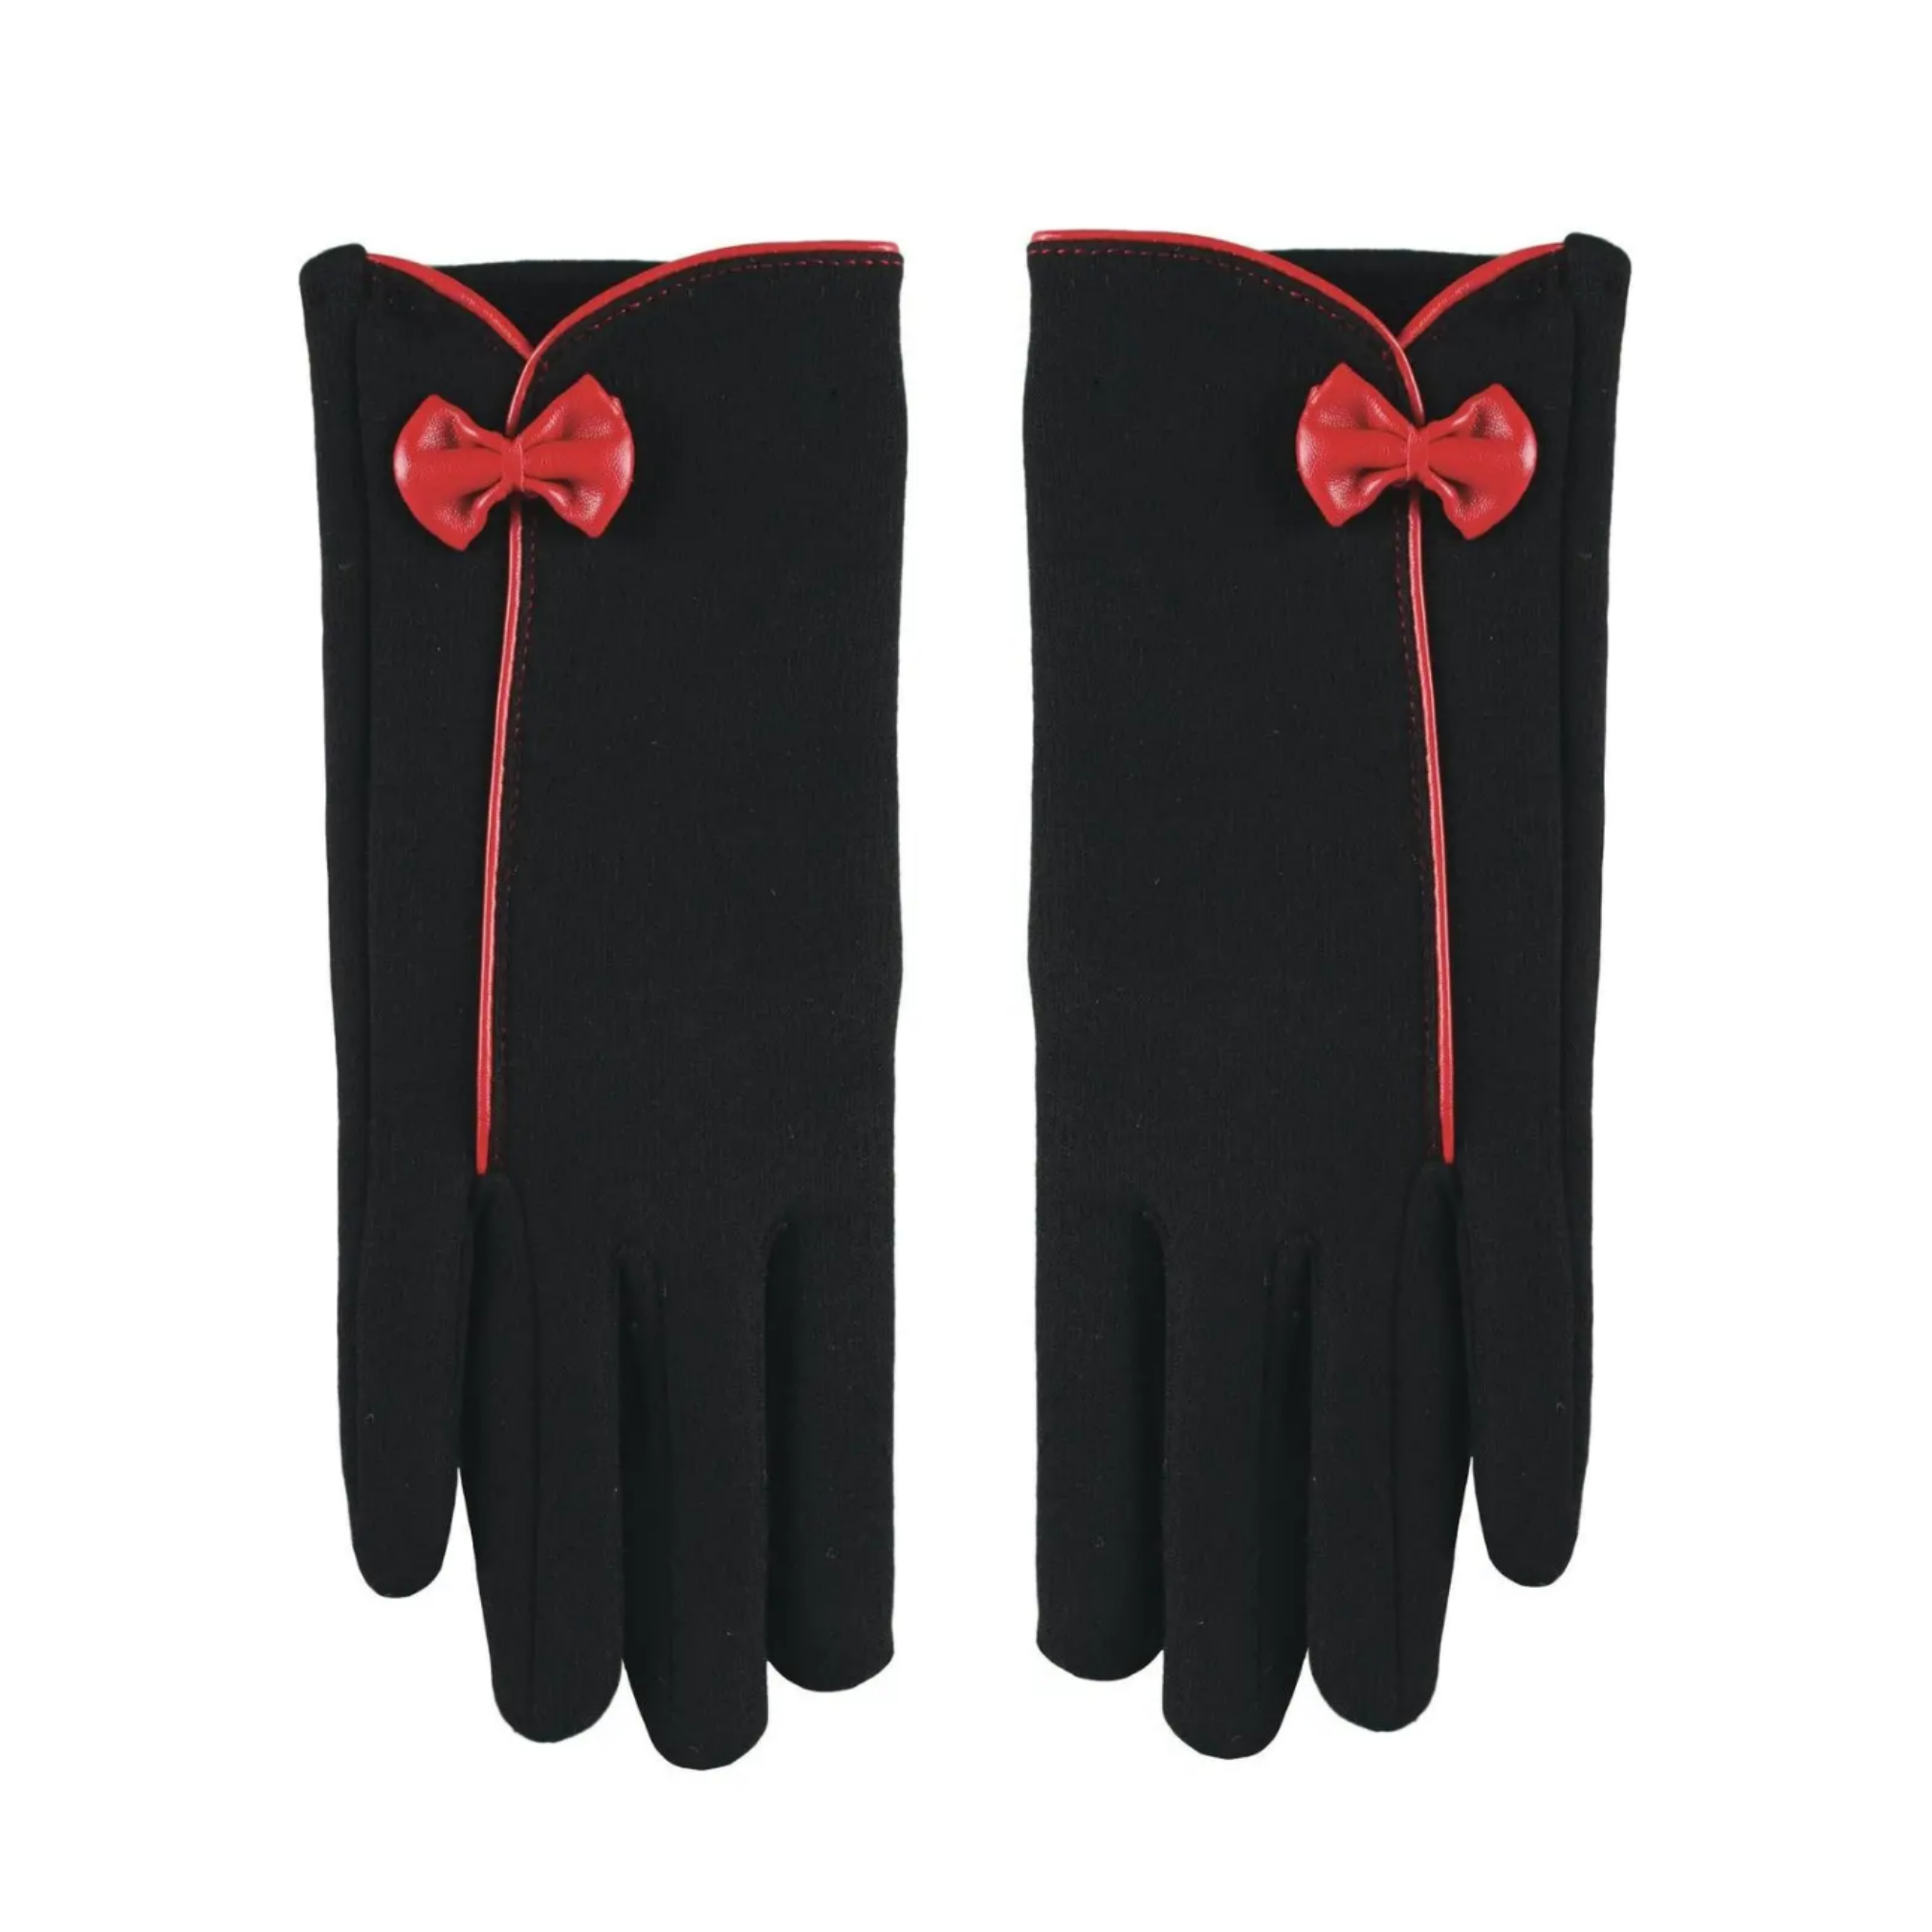 pair black ponte knit gloves with red faux leather bow & piping details